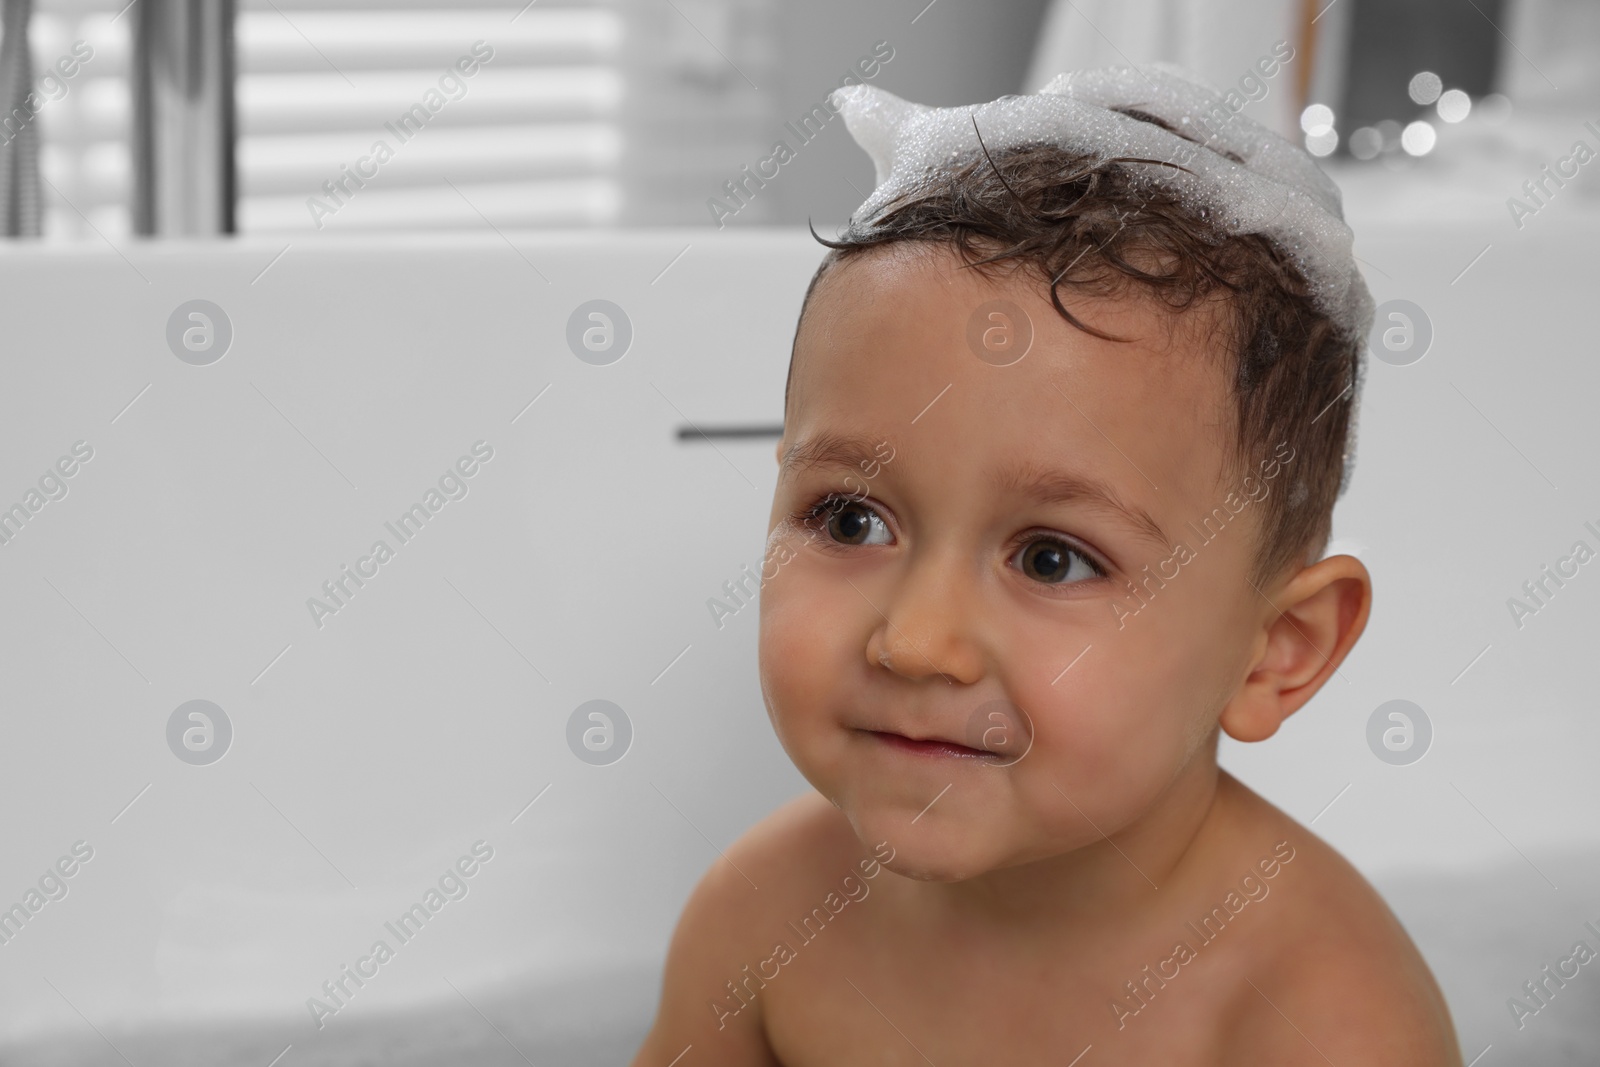 Photo of Cute little boy washing hair with shampoo in bathroom. Space for text